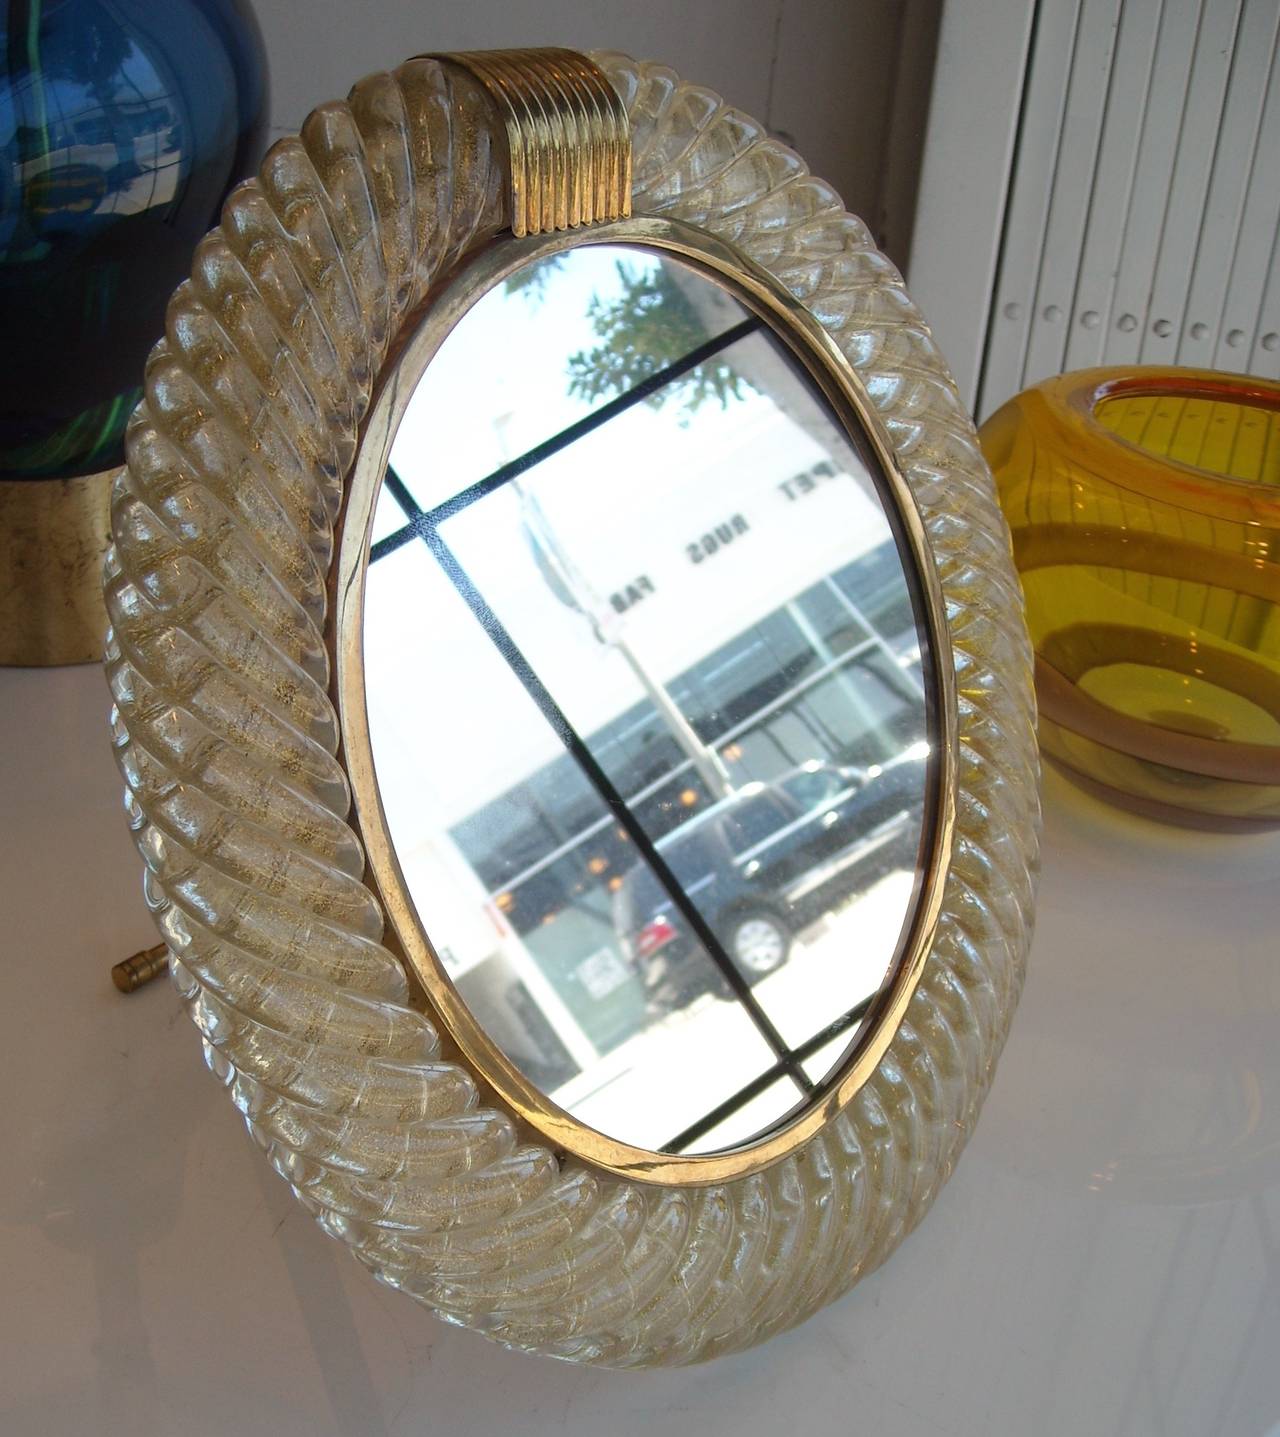 Great vanity gold glass and brass mirror, partial early red label in back as shown in picture.